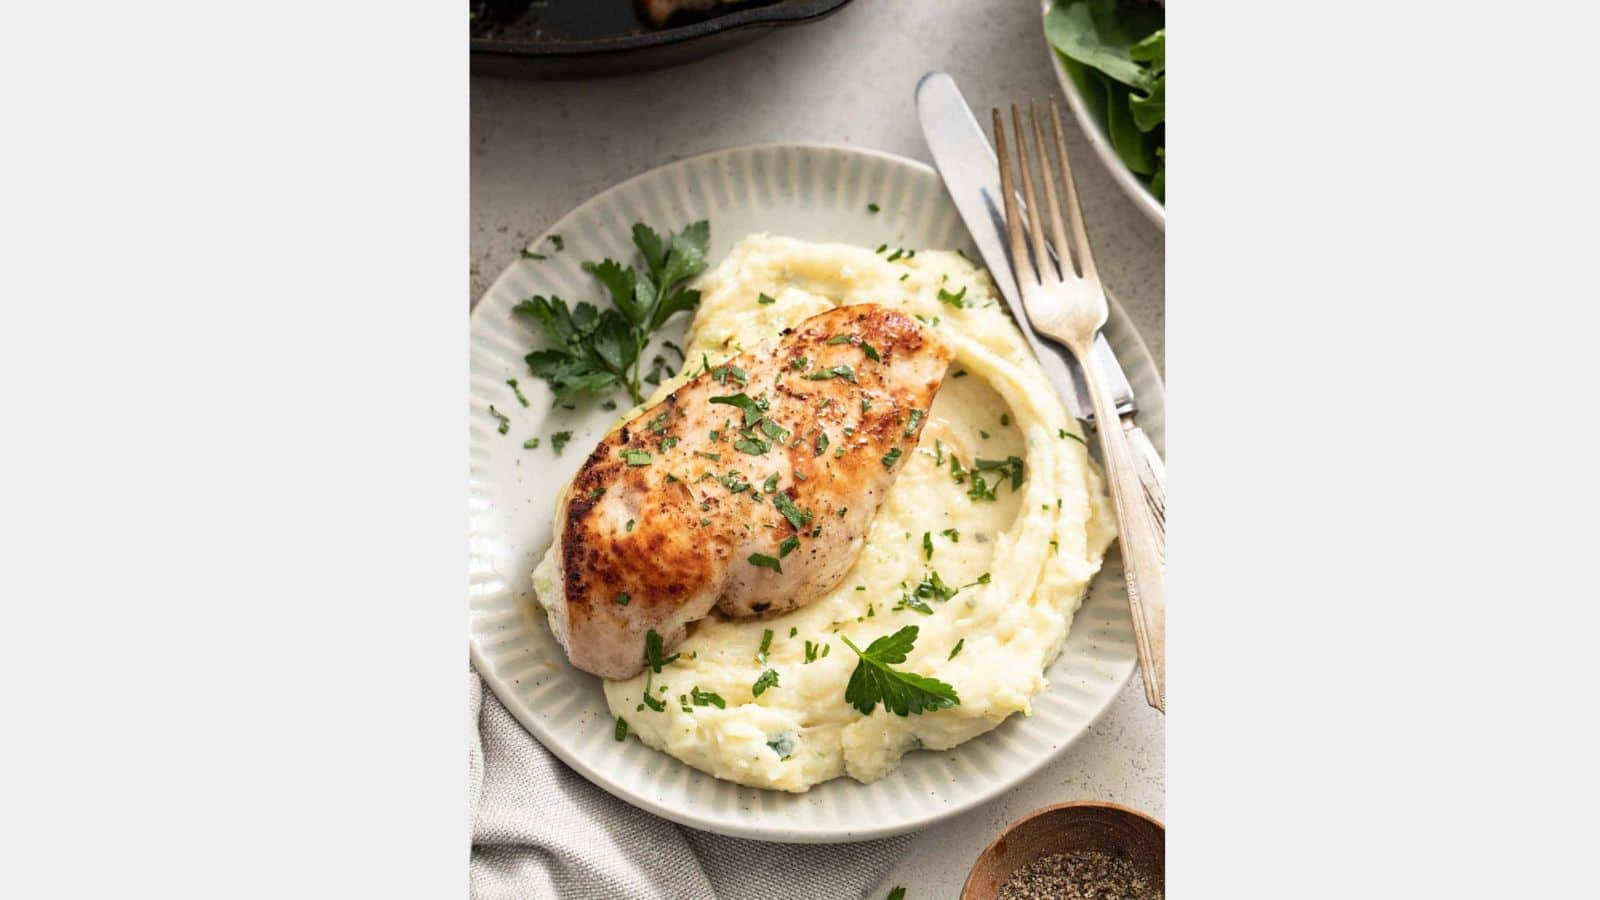 ricotta chicken on mashed potatoes in a bowl